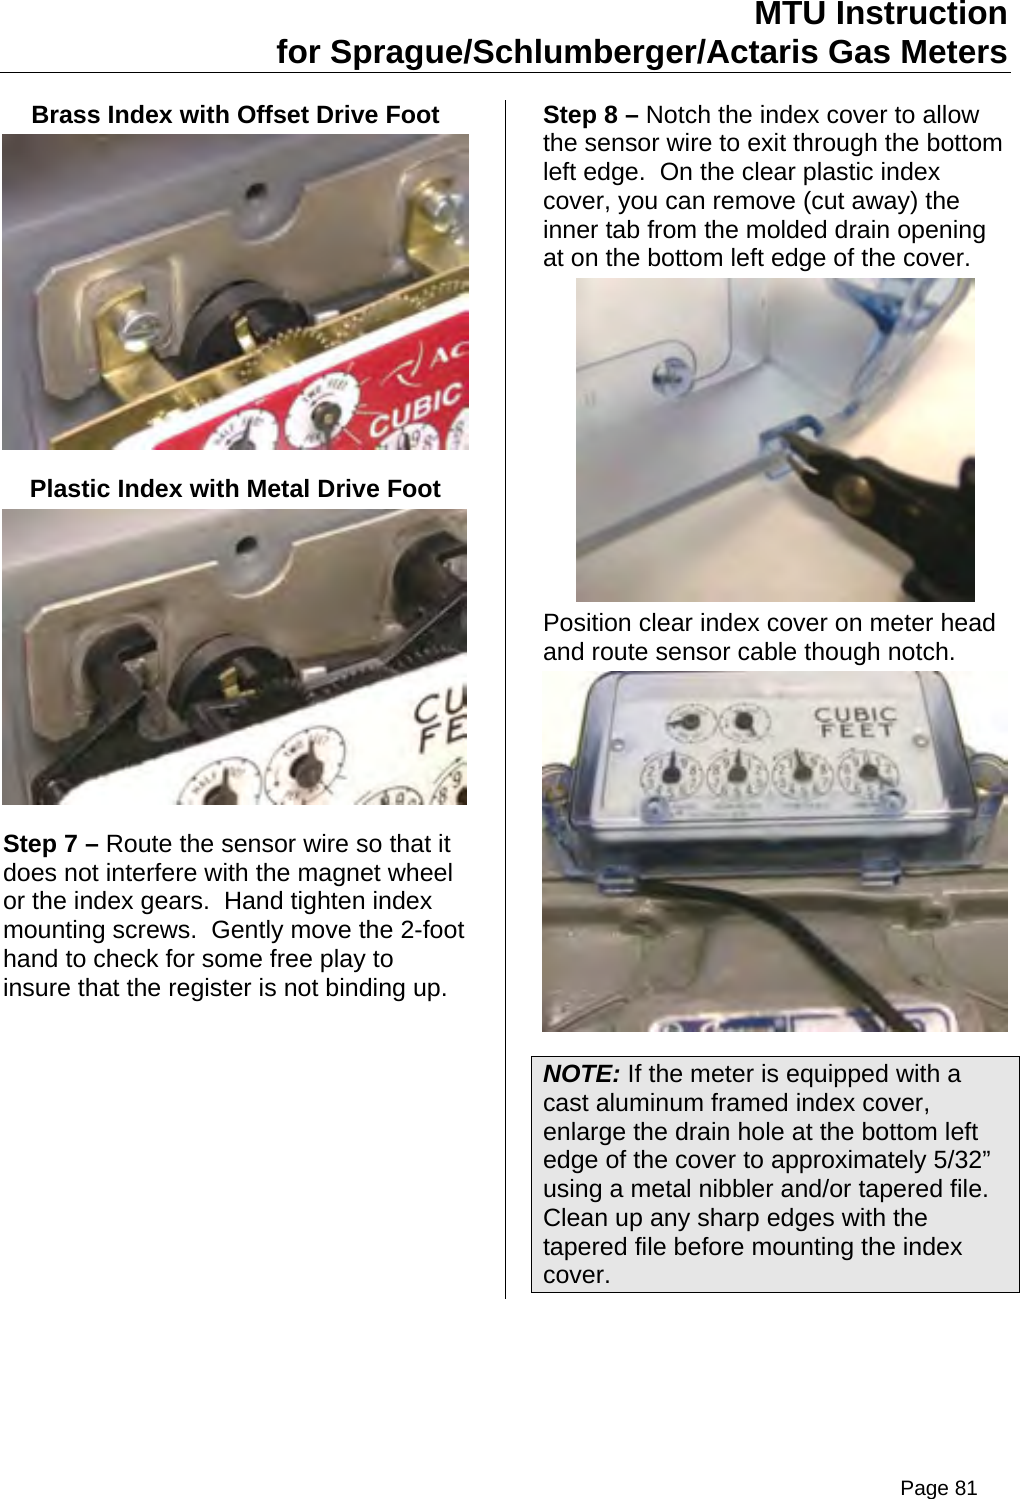 Page 81 of Aclara Technologies 09015 Transmitter for Meter Reading User Manual users manual